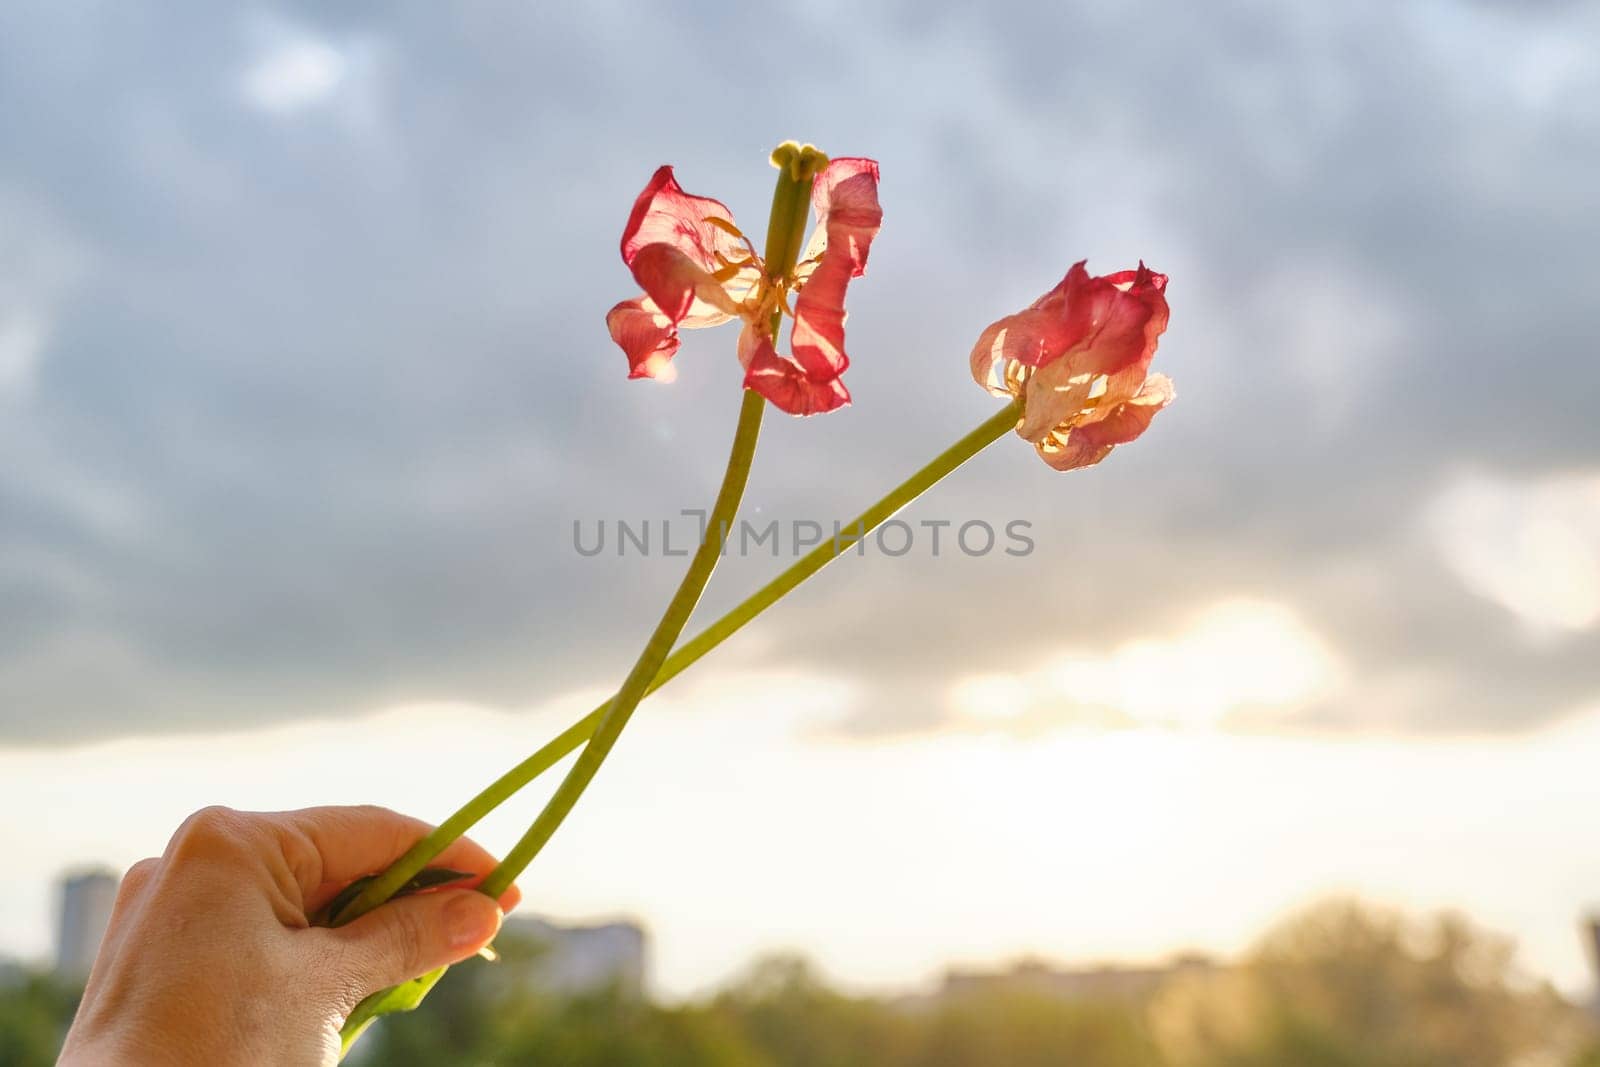 Two withered flowers of tulips in hand woman, dramatic evening sunset sky with clouds by VH-studio